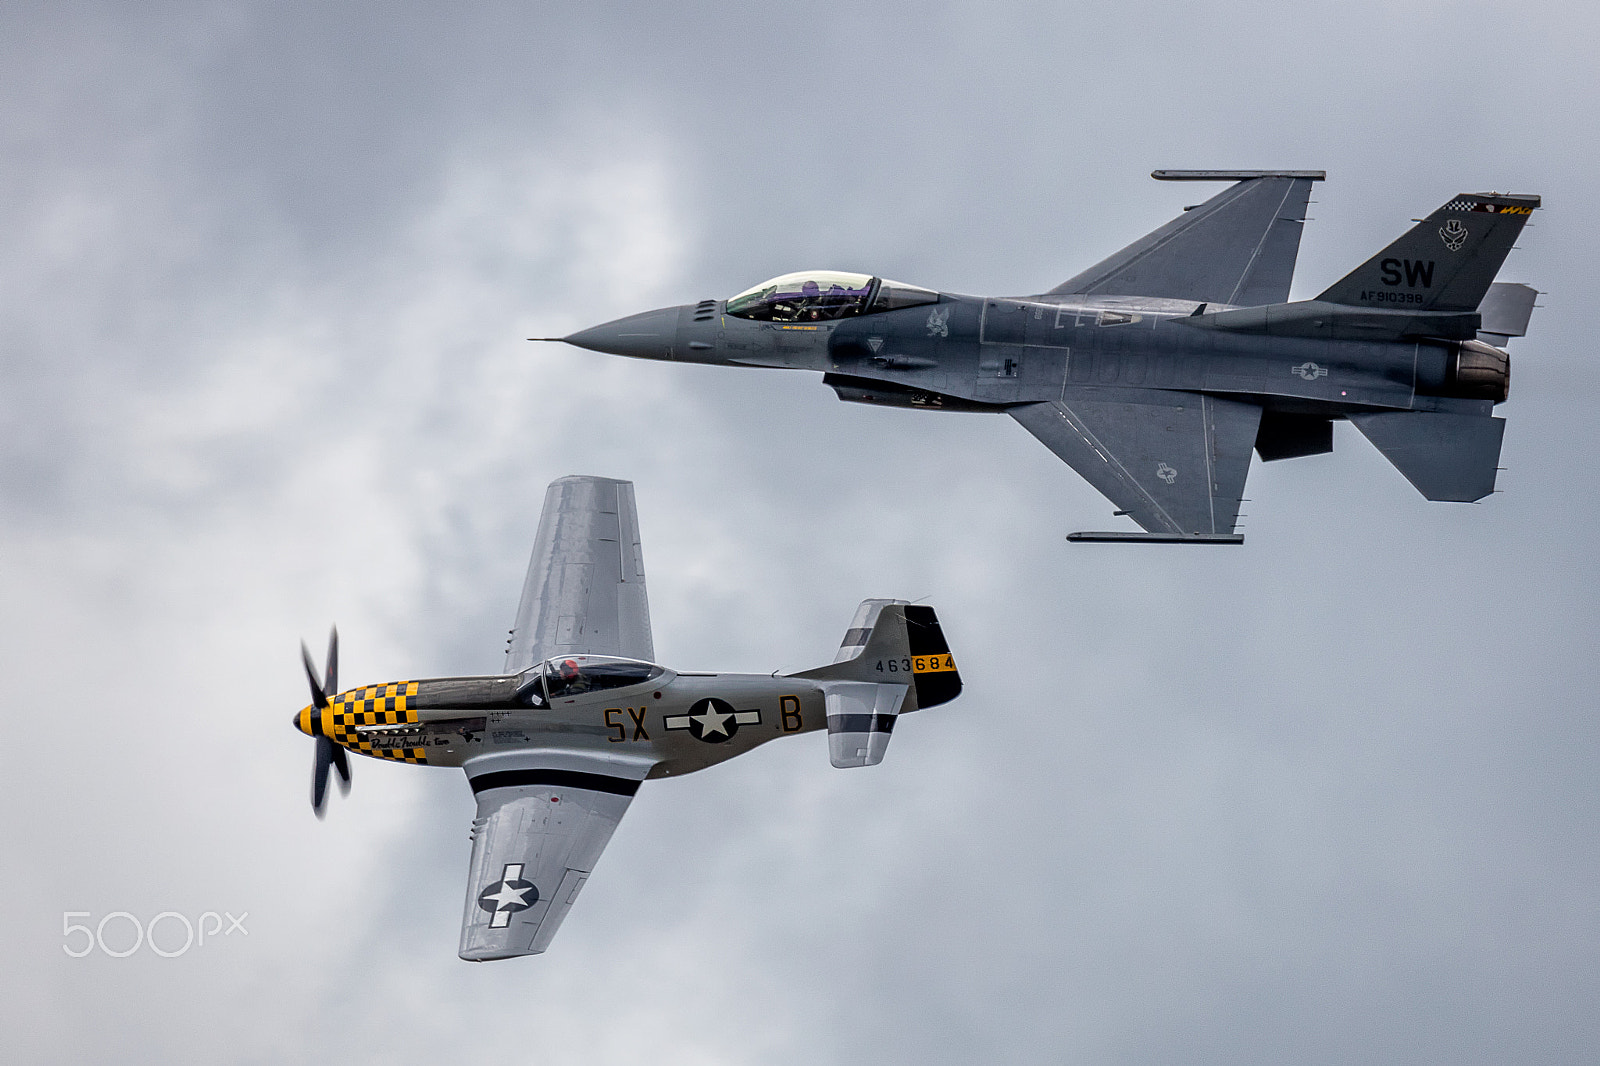 Canon EOS 5DS + 150-600mm F5-6.3 DG OS HSM | Sports 014 sample photo. P-51 mustang and f-16 fighting falcon in flight photography